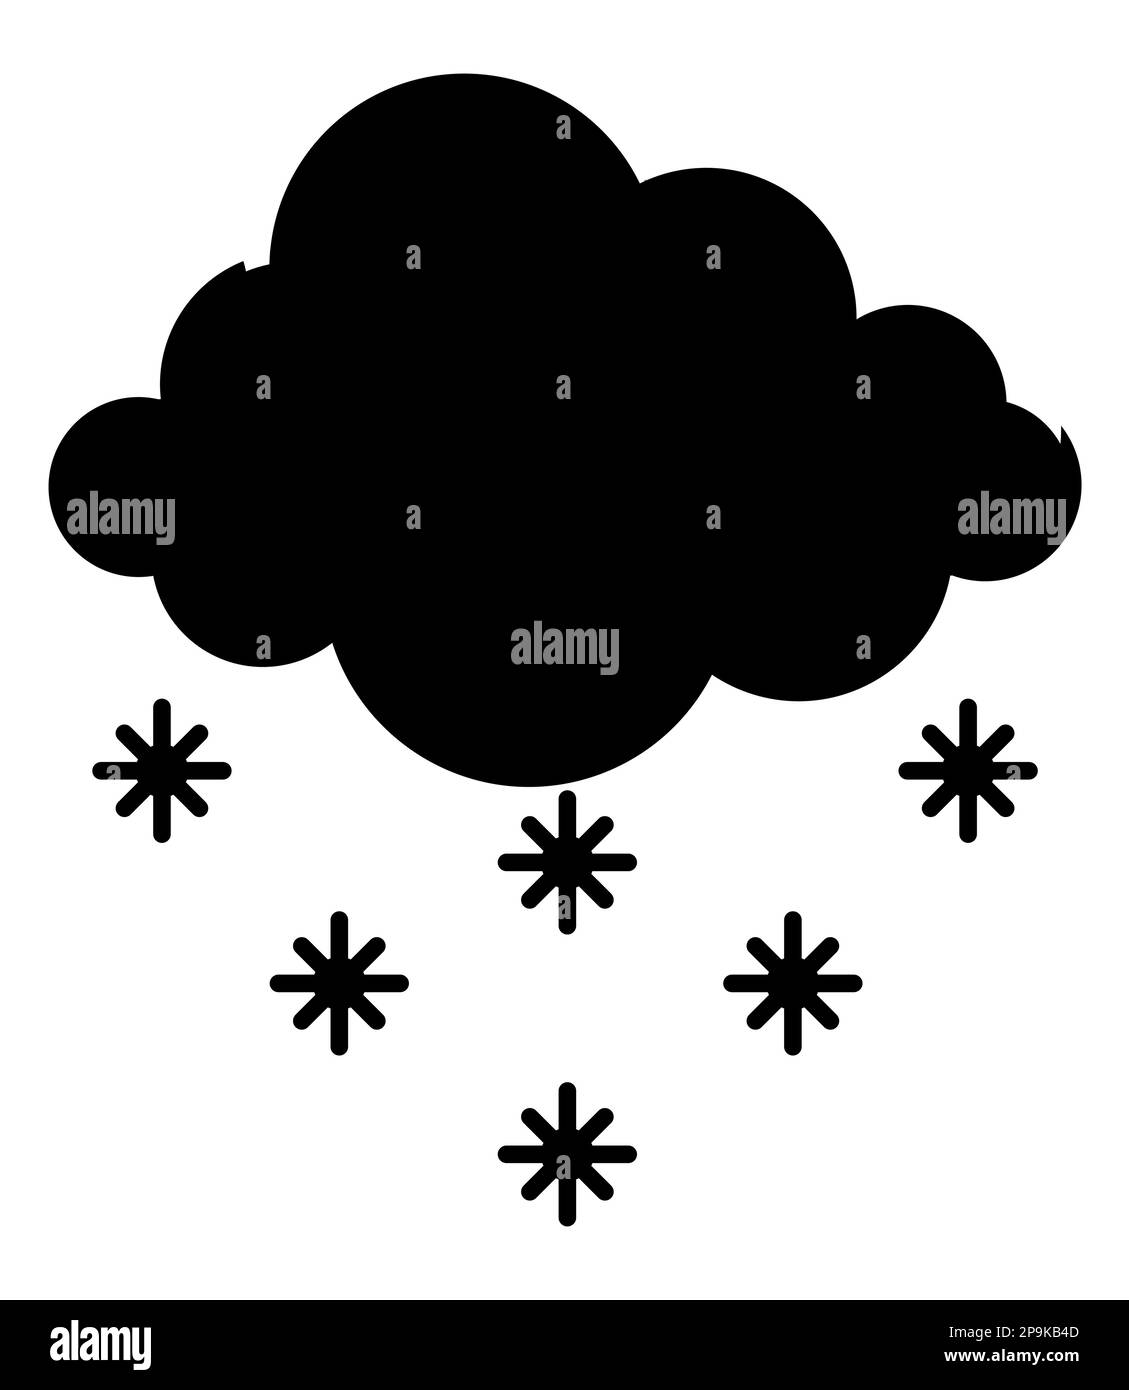 Black silhouette of a cloud with snowflakes falling from it, snow logo, weather icon - vector illustration Stock Vector